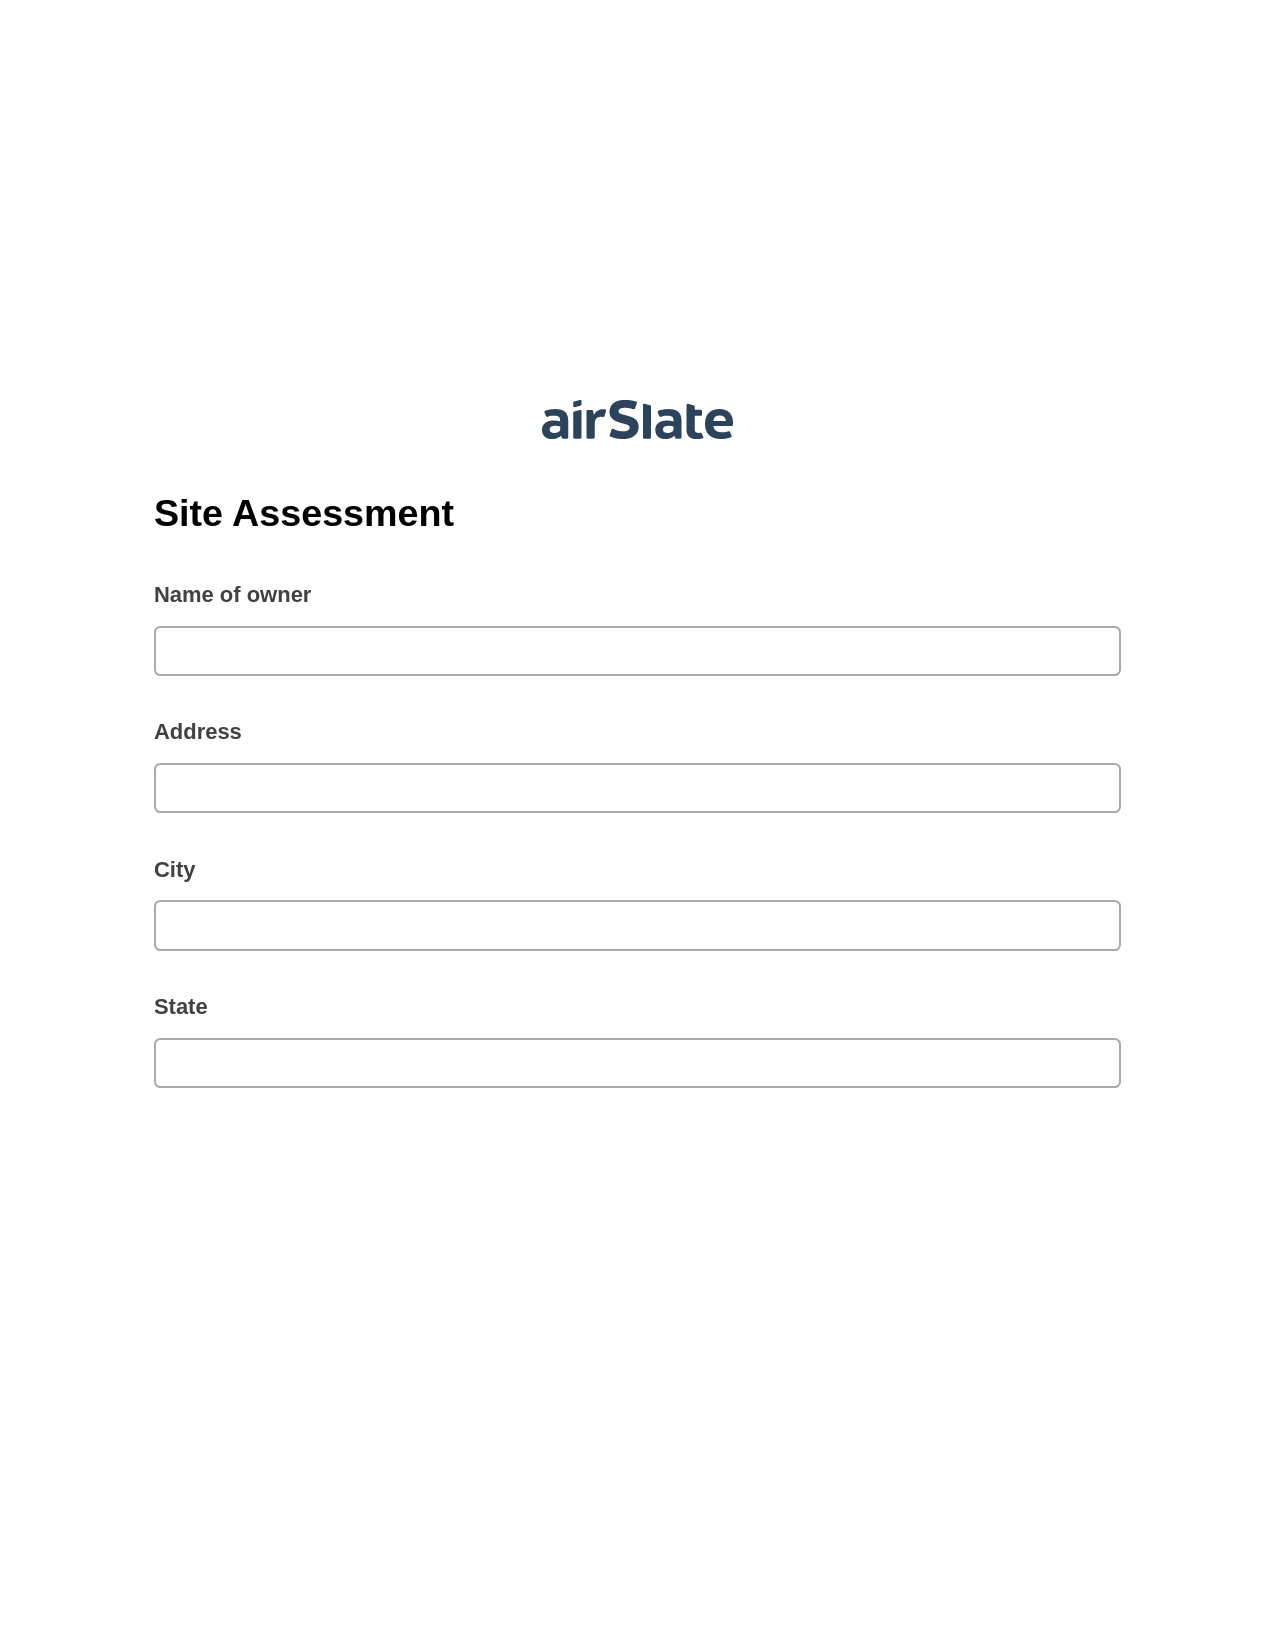 Multirole Site Assessment Pre-fill from CSV File Bot, Pre-fill with Custom Data Bot, Dropbox Bot